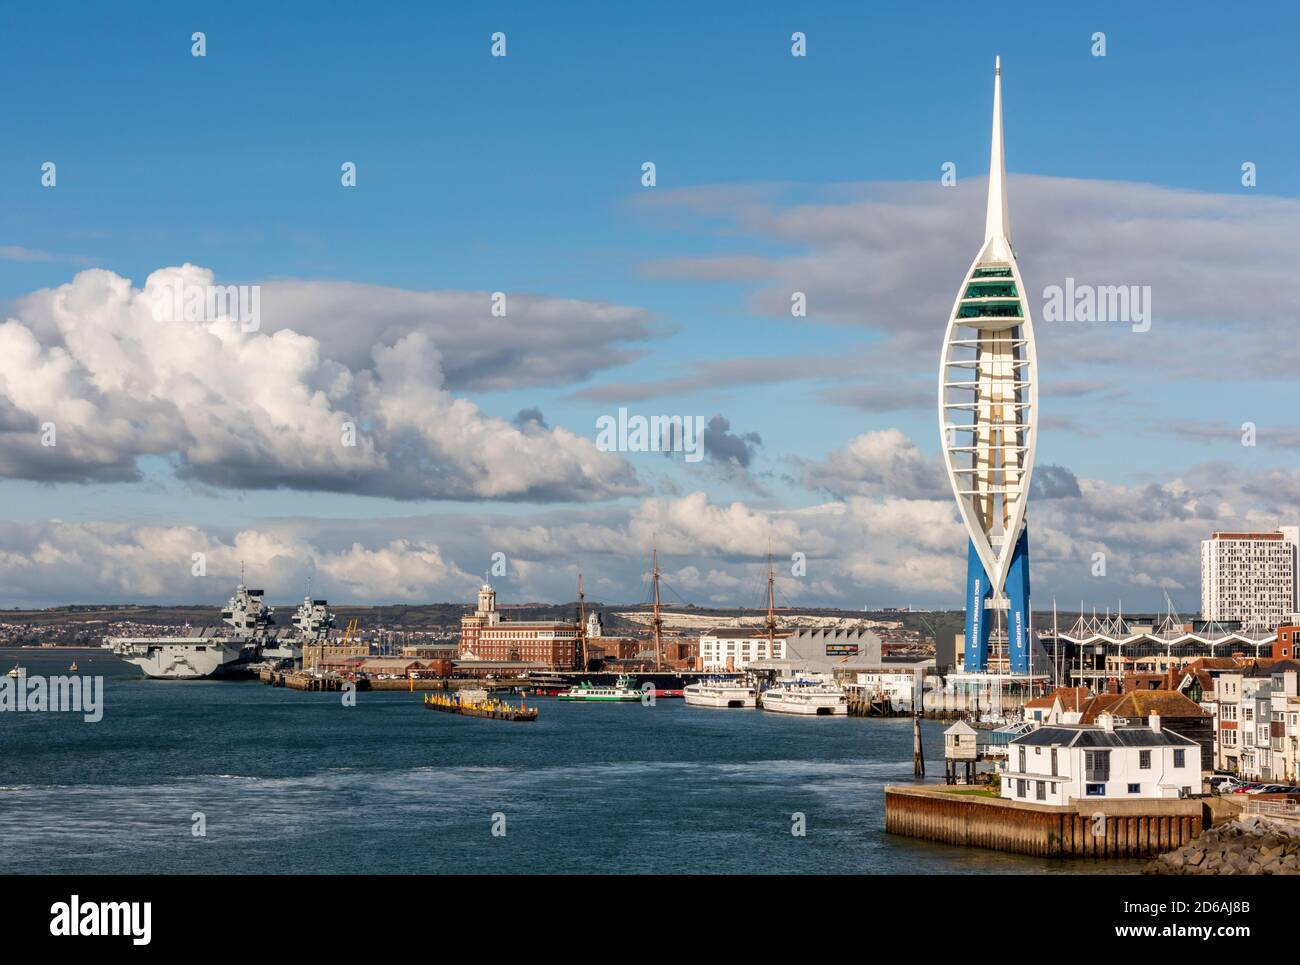 the entrance to portsmouth harbour with the spinnaker tower and hms queen elizabeth under a sky full of summer clouds. Stock Photo